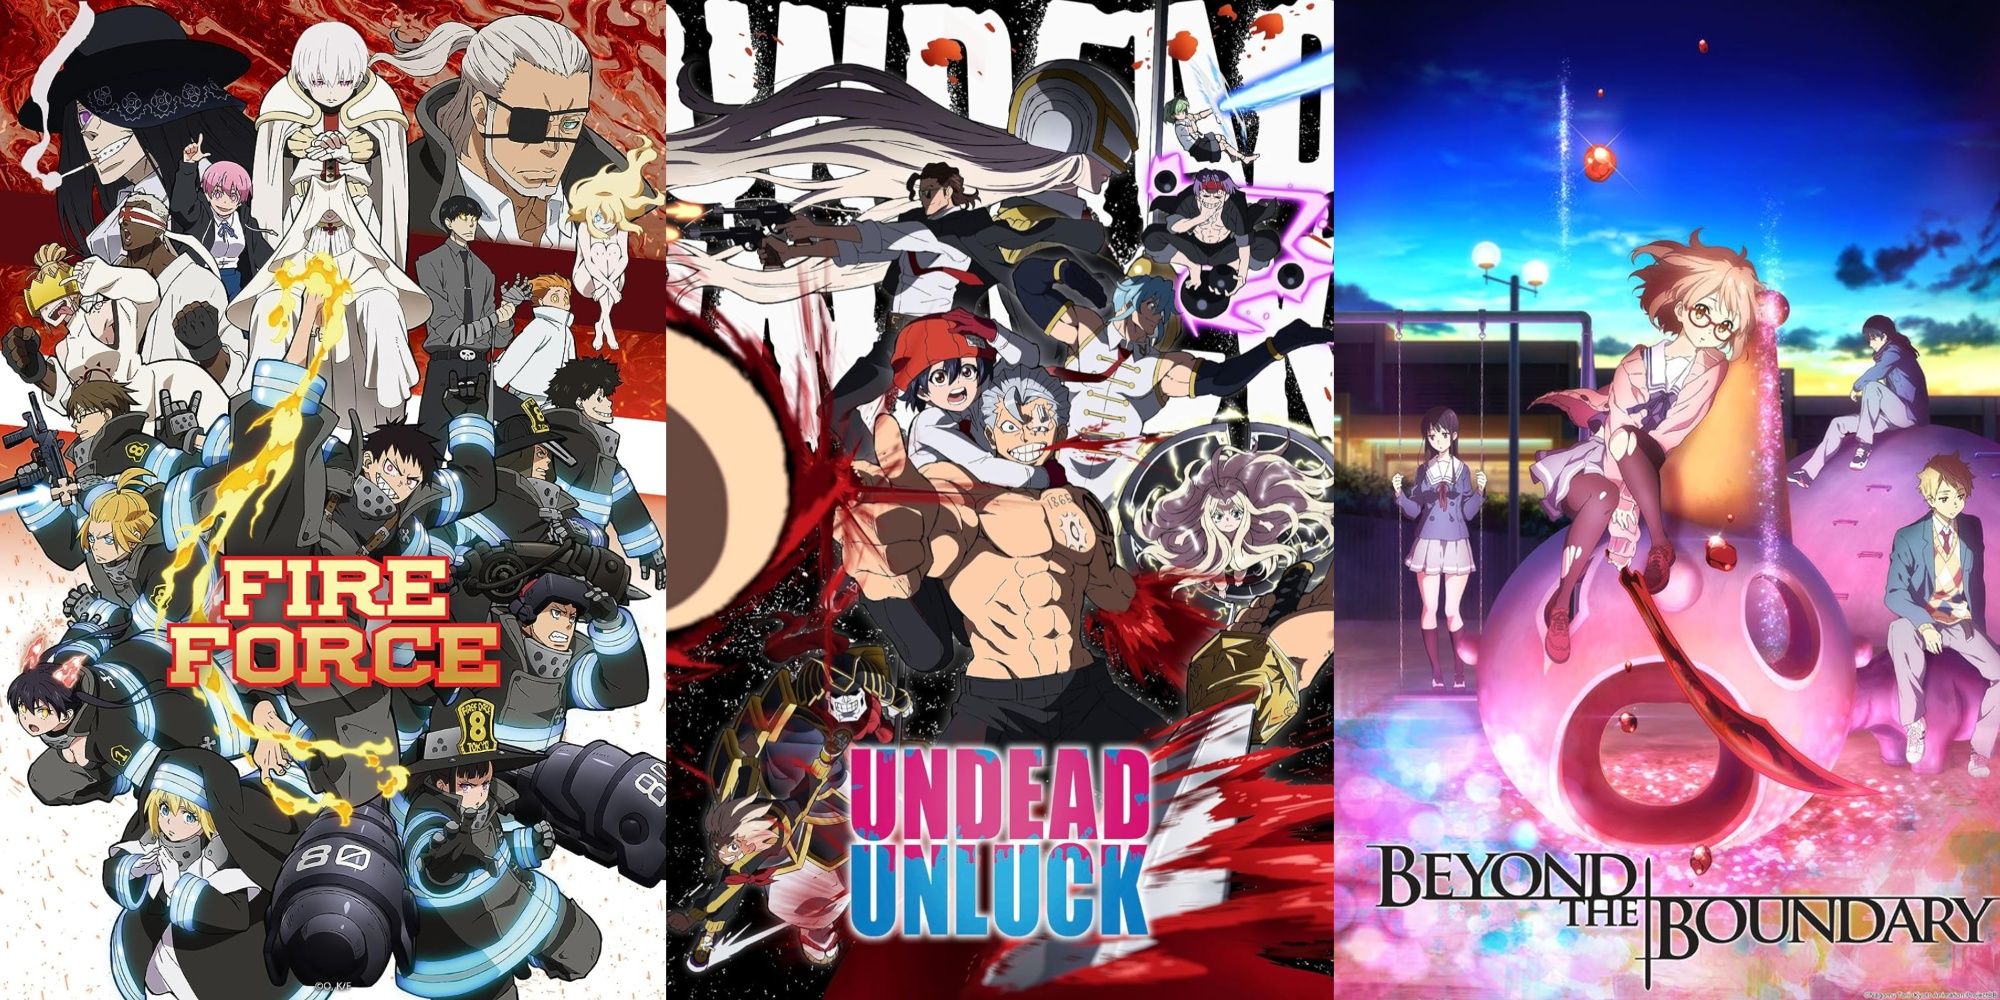  Best Action Comedy Anime To Watch If You Love Undead Unluck featured image